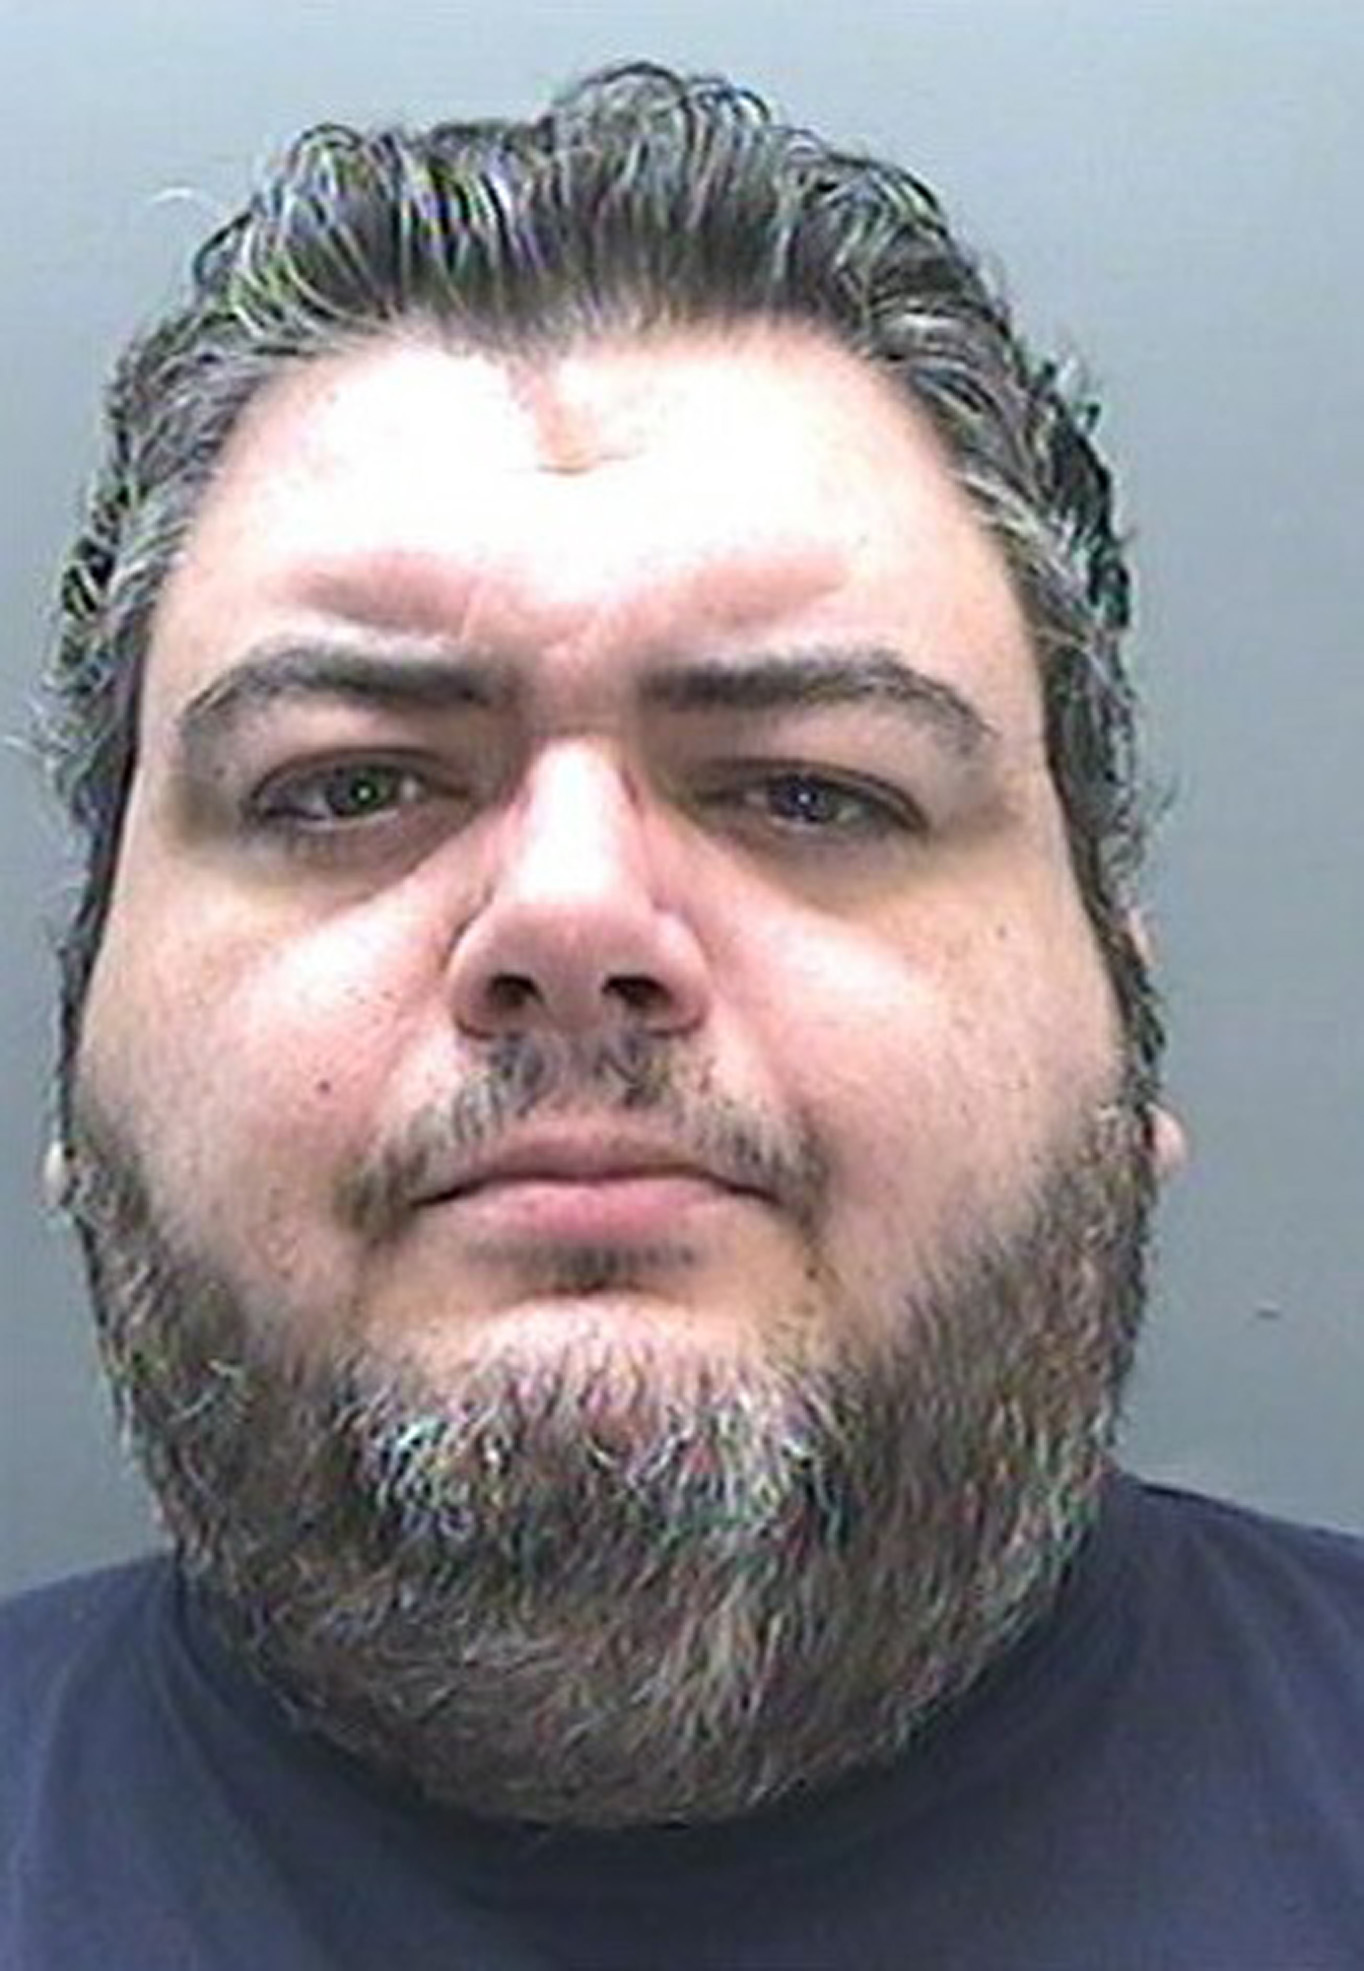 Adriano Bettoja-Allen was sentenced to five years in prison after admitting two counts of assisting illegal immigratio